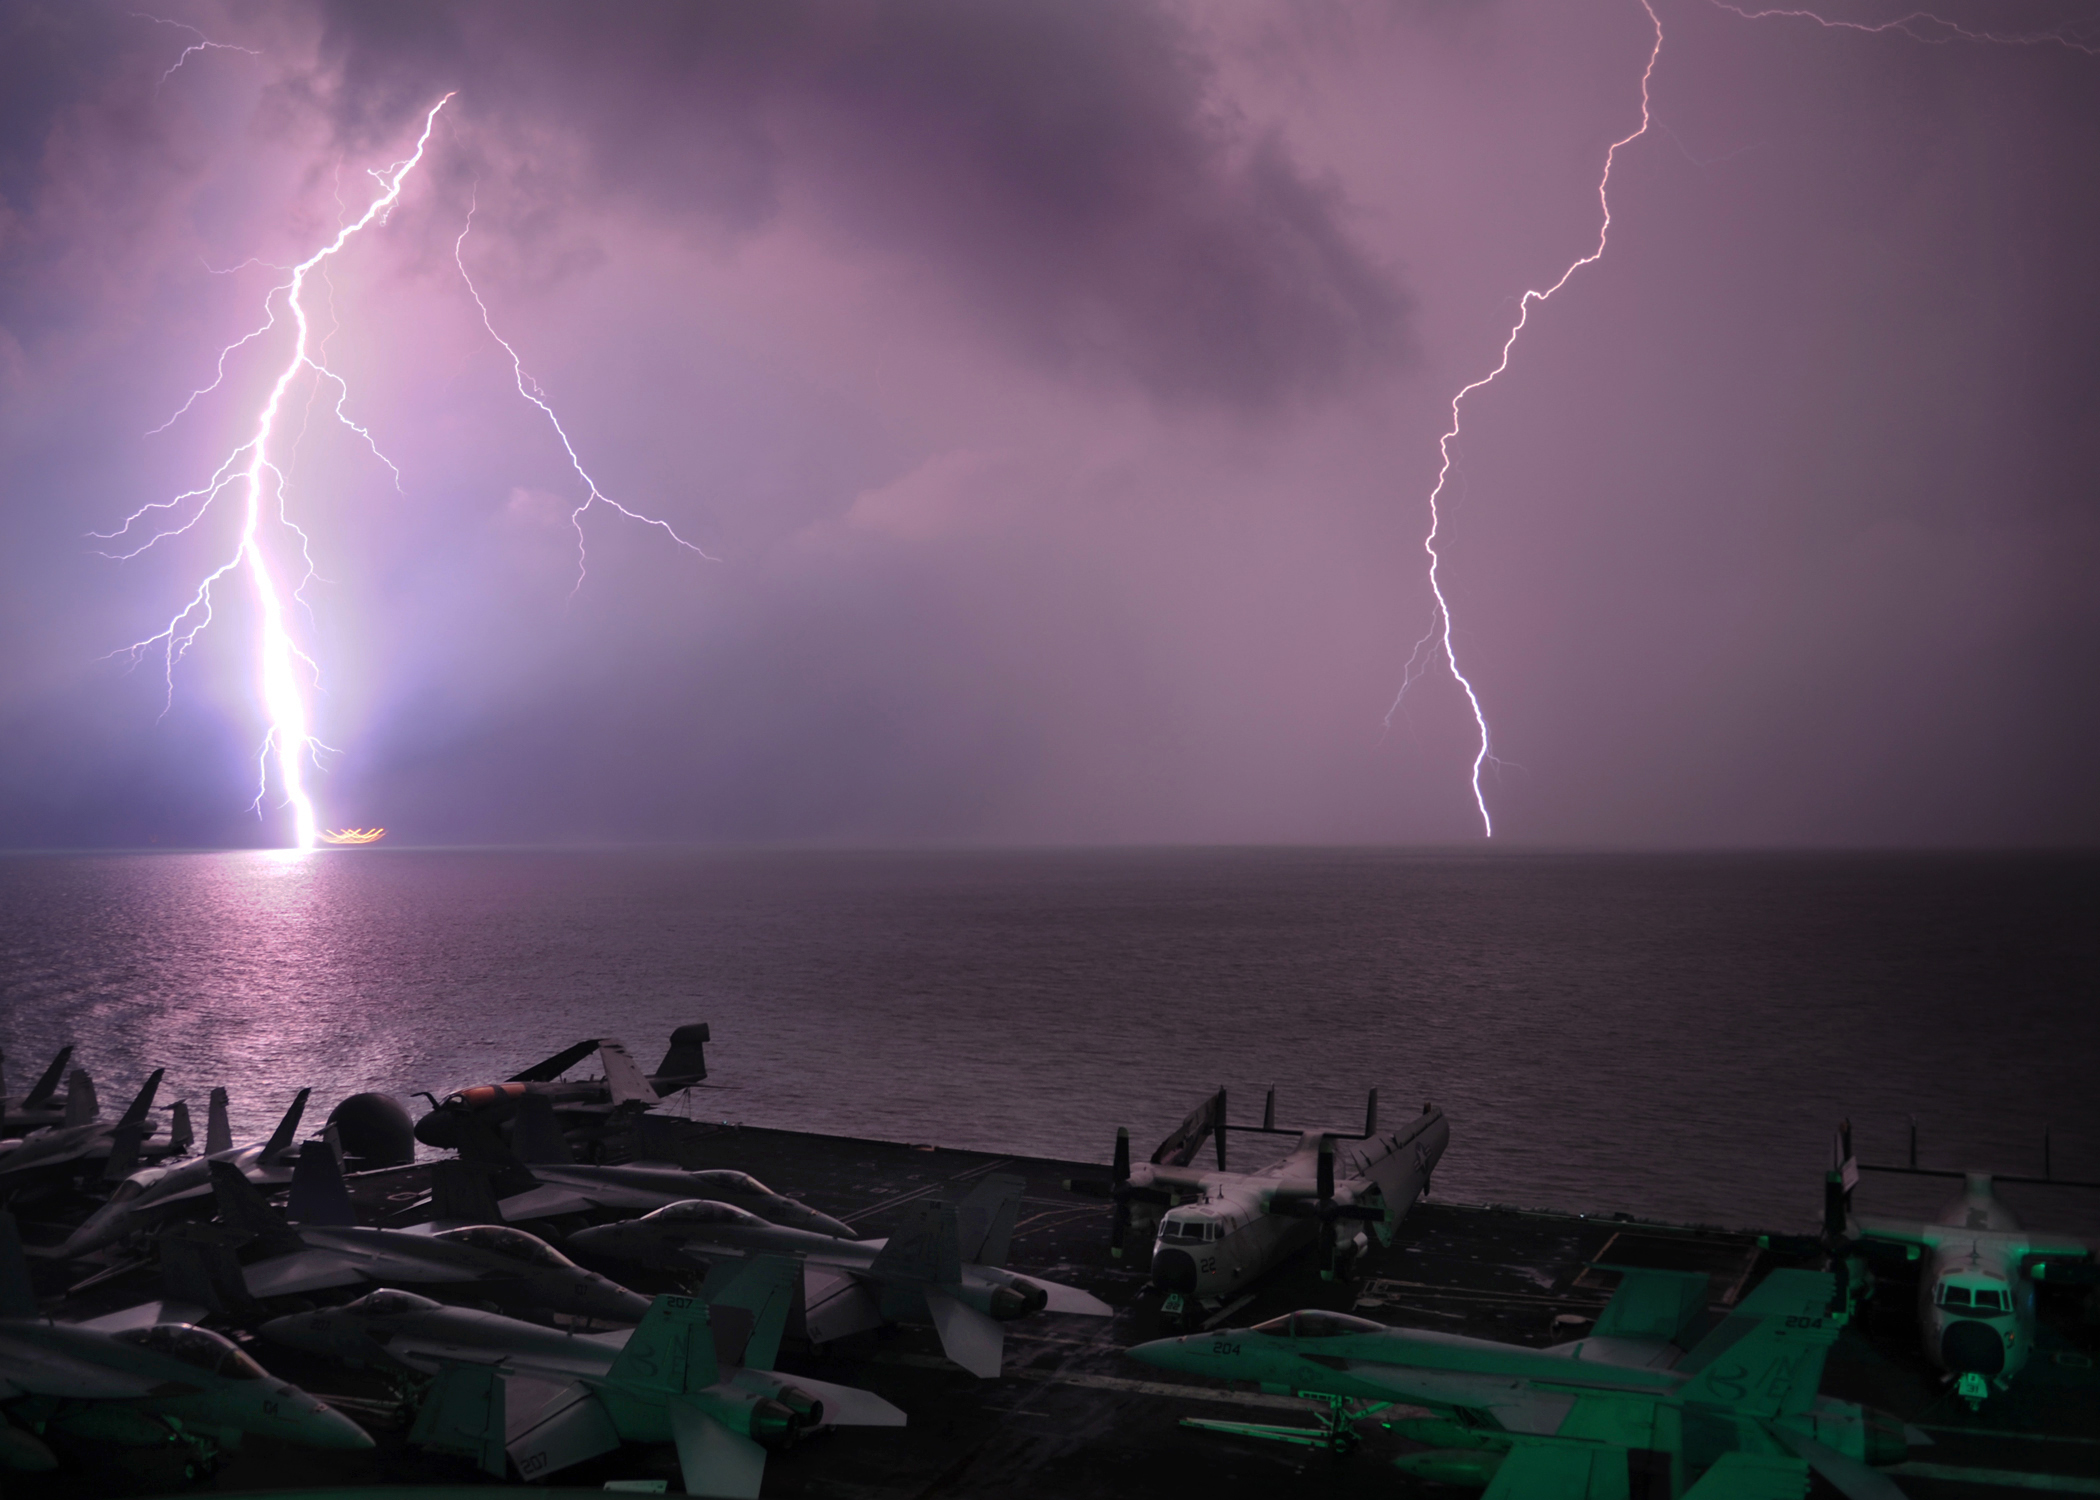 Lightning flashes as the aircraft carrier USS Abraham Lincoln (CVN 72) transits the Strait of Malacca